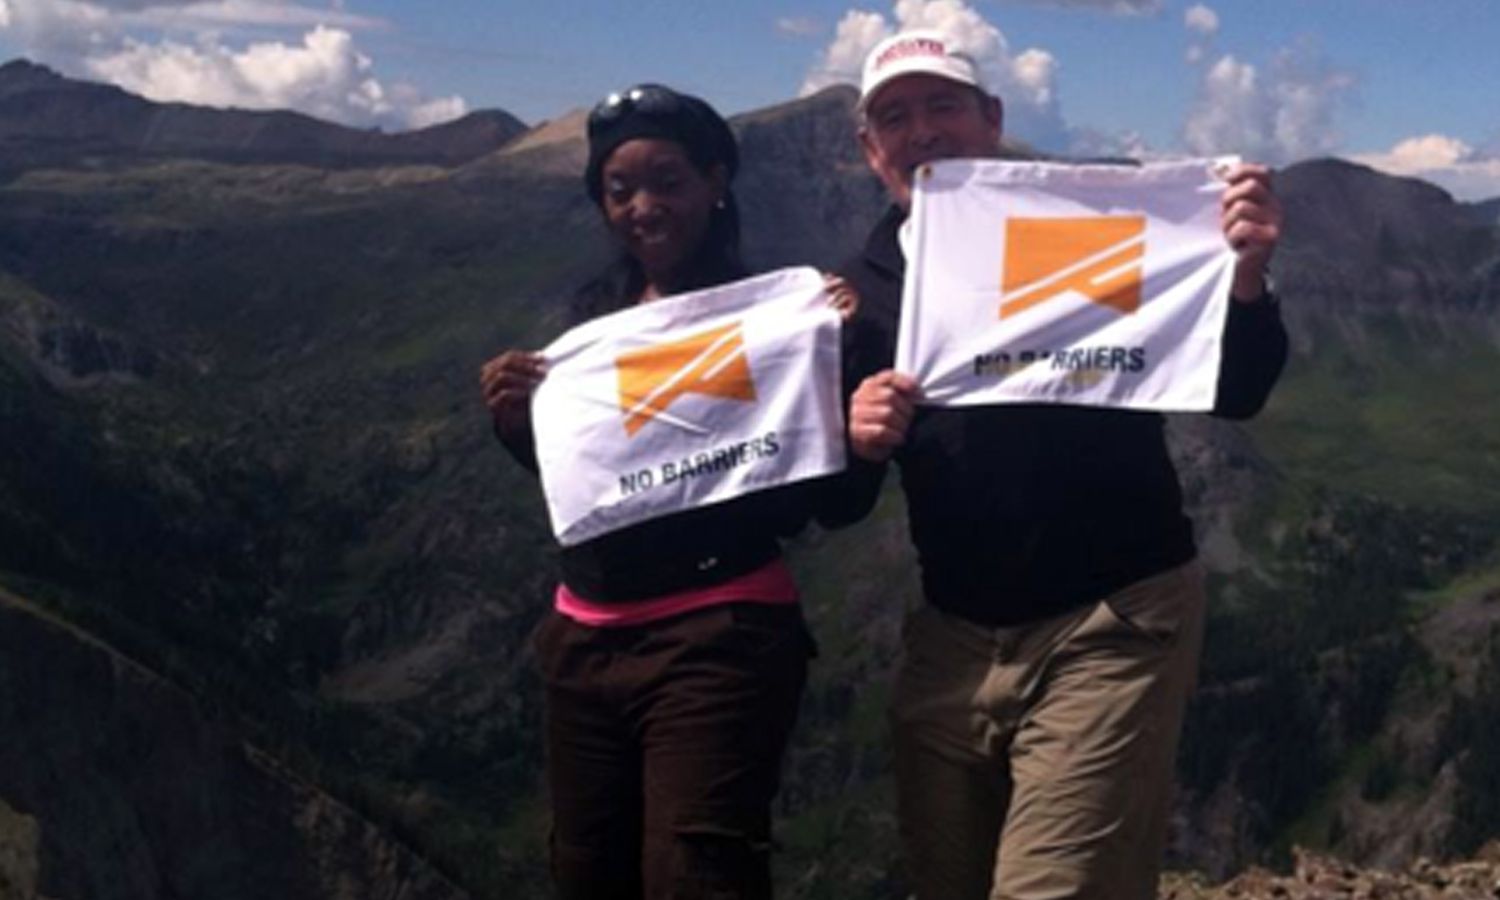 Photo of blog author with teammate at top of mountain. They are holding flags with the logo of No Barriers USA.